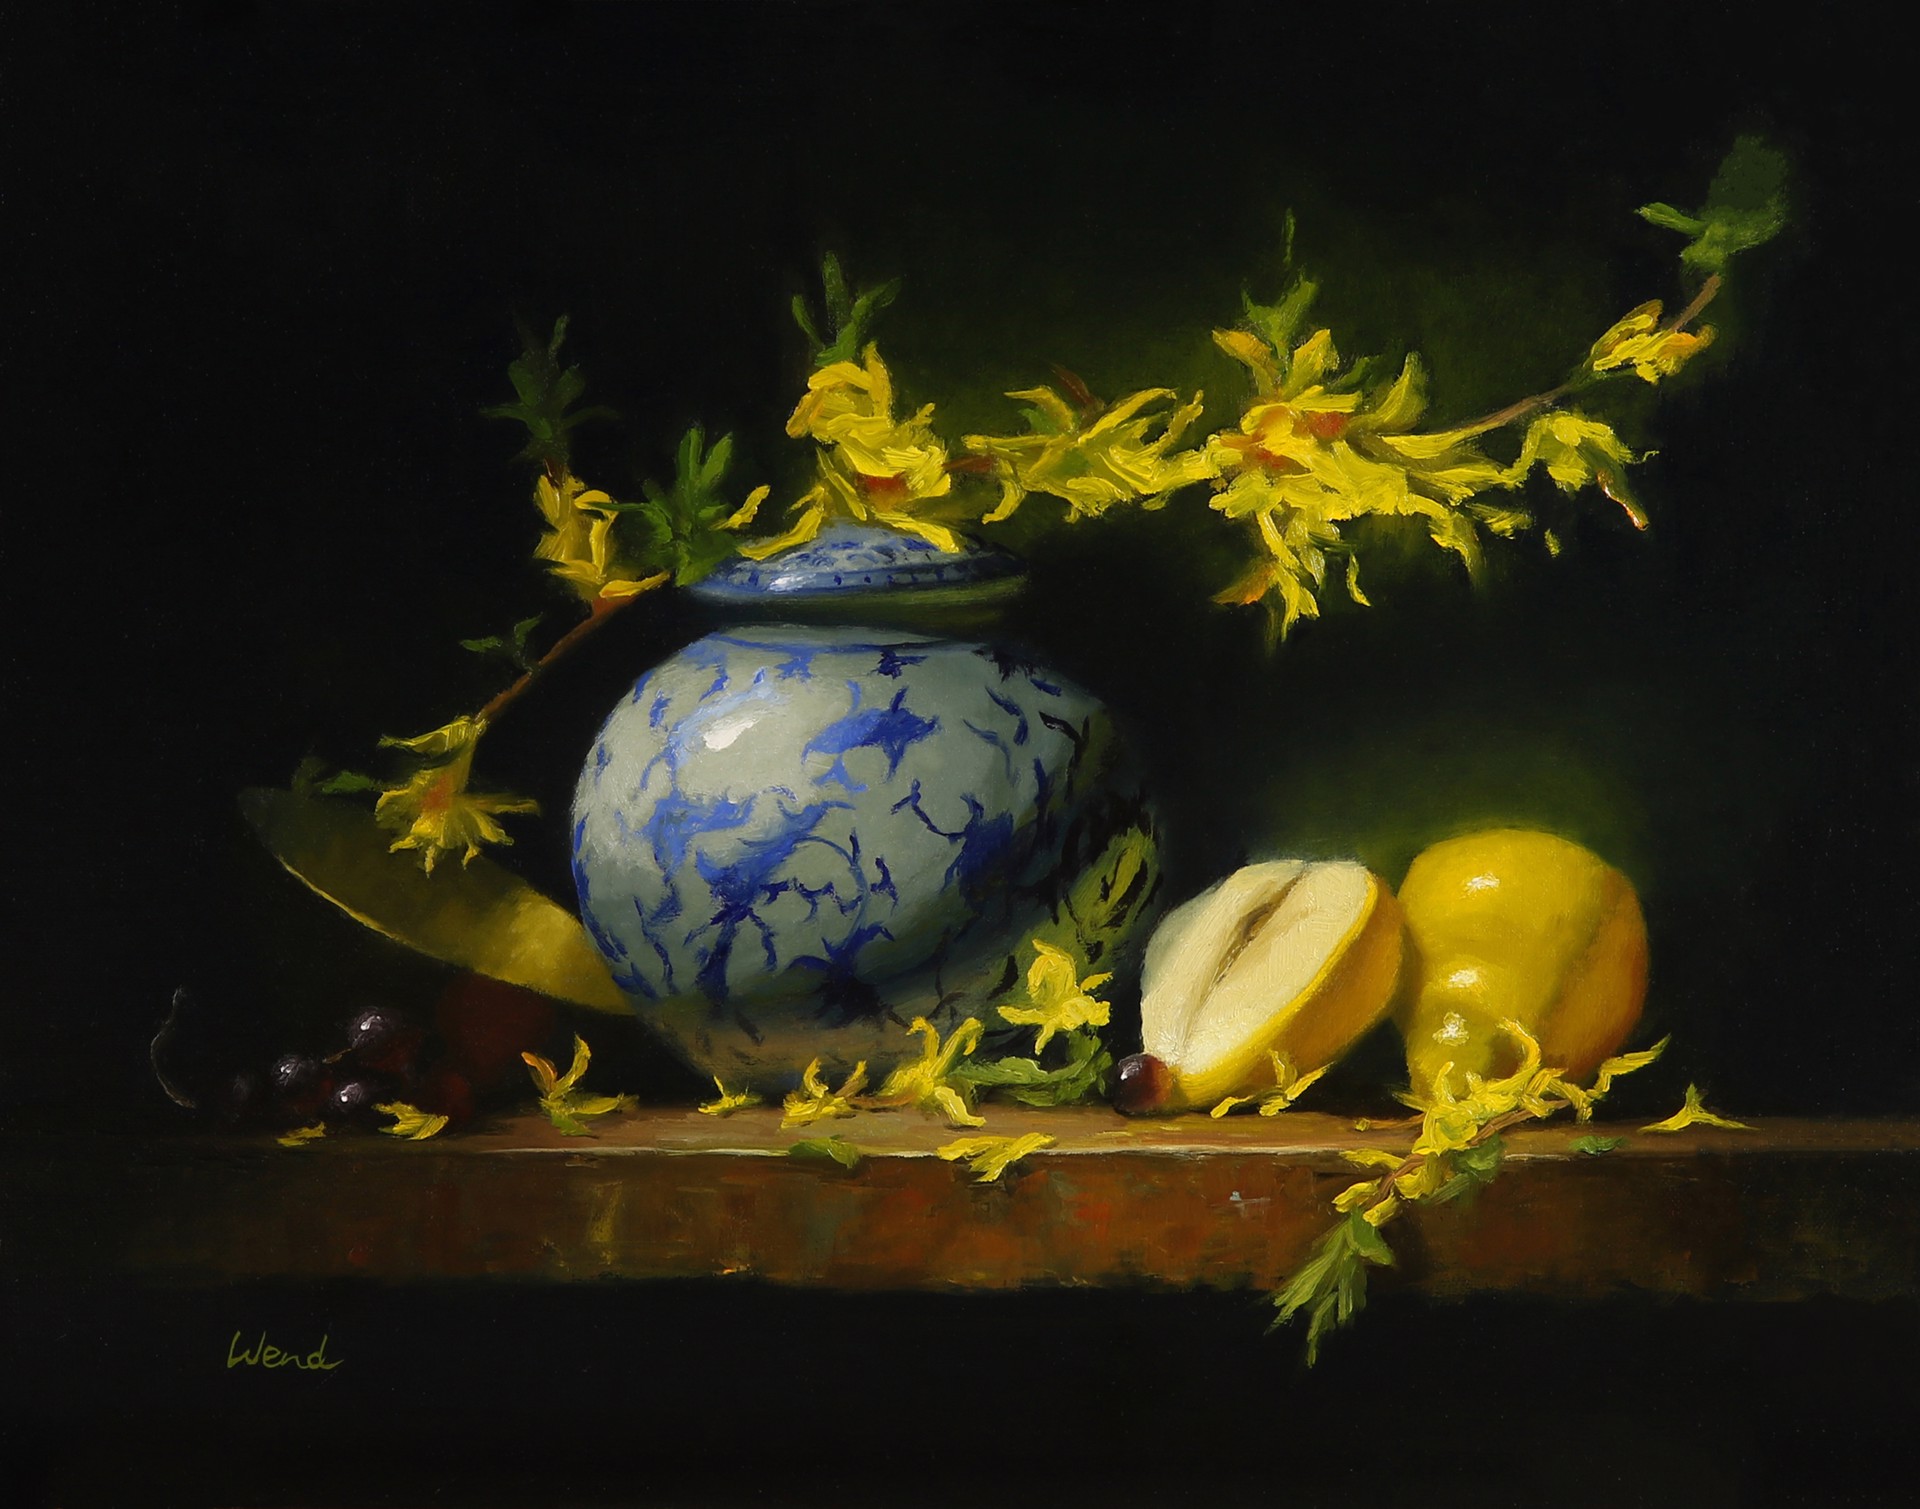 Forsythia in Blue - AWARD WINNER - SECOND PLACE by Trish Wend